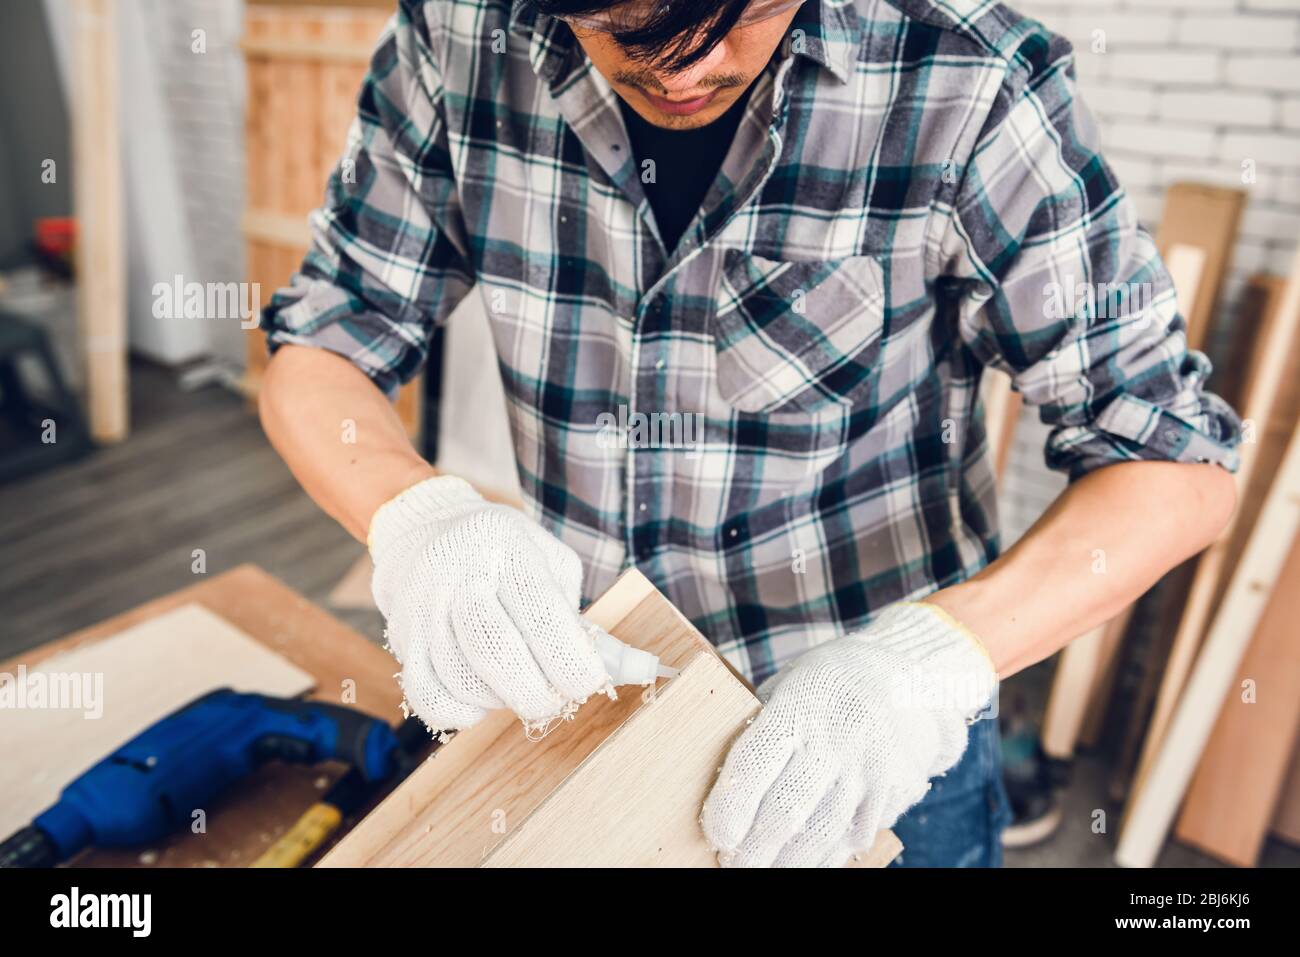 Carpenter Man is Working Timber Woodworking in Carpentry Shop, Craftsman is Screw Coring Timber Frame for Wooden Furniture in Workshop. Workmanship an Stock Photo